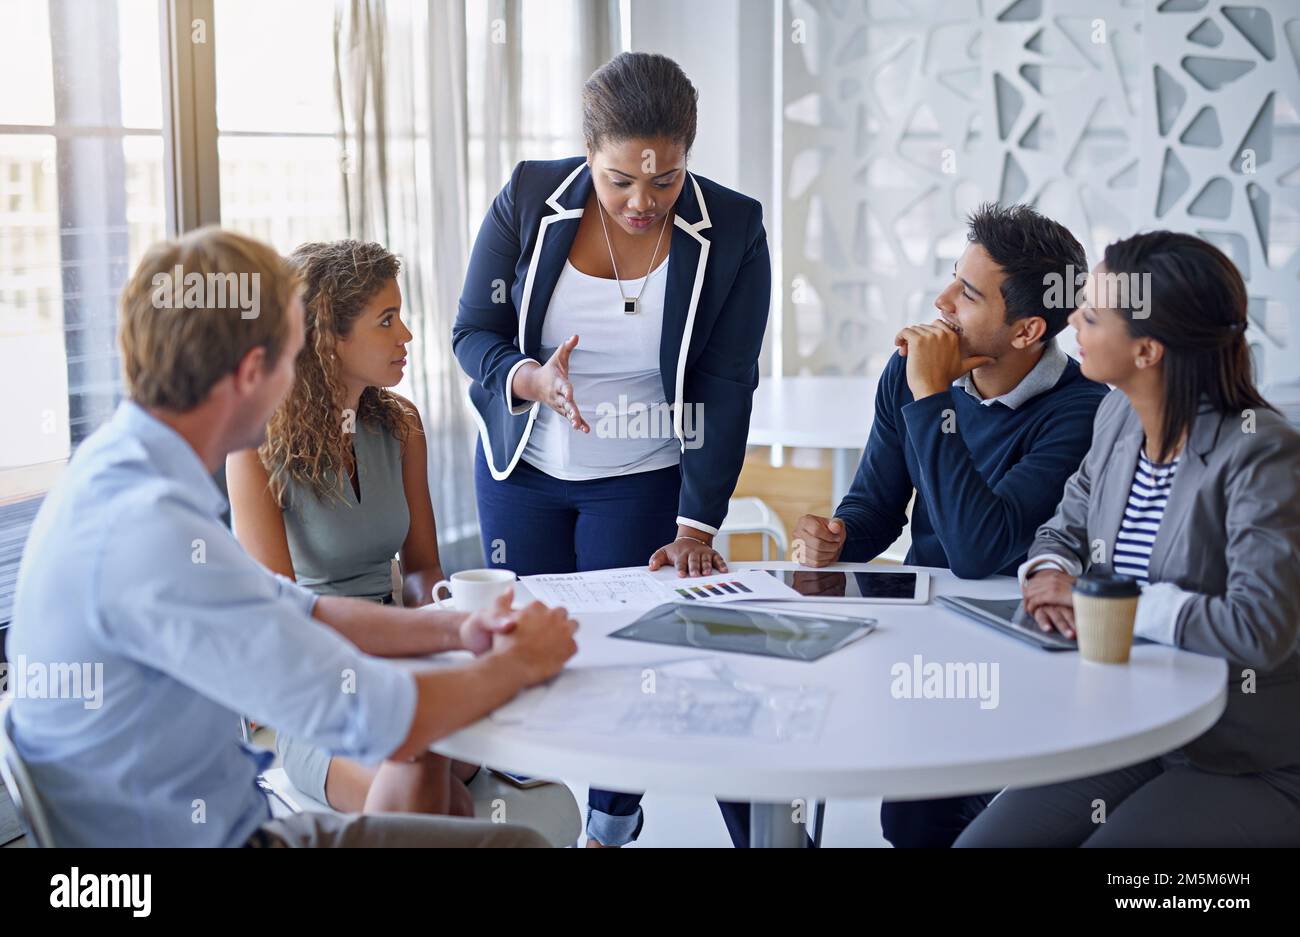 Getting down to business. a group of colleagues working together in an office. Stock Photo